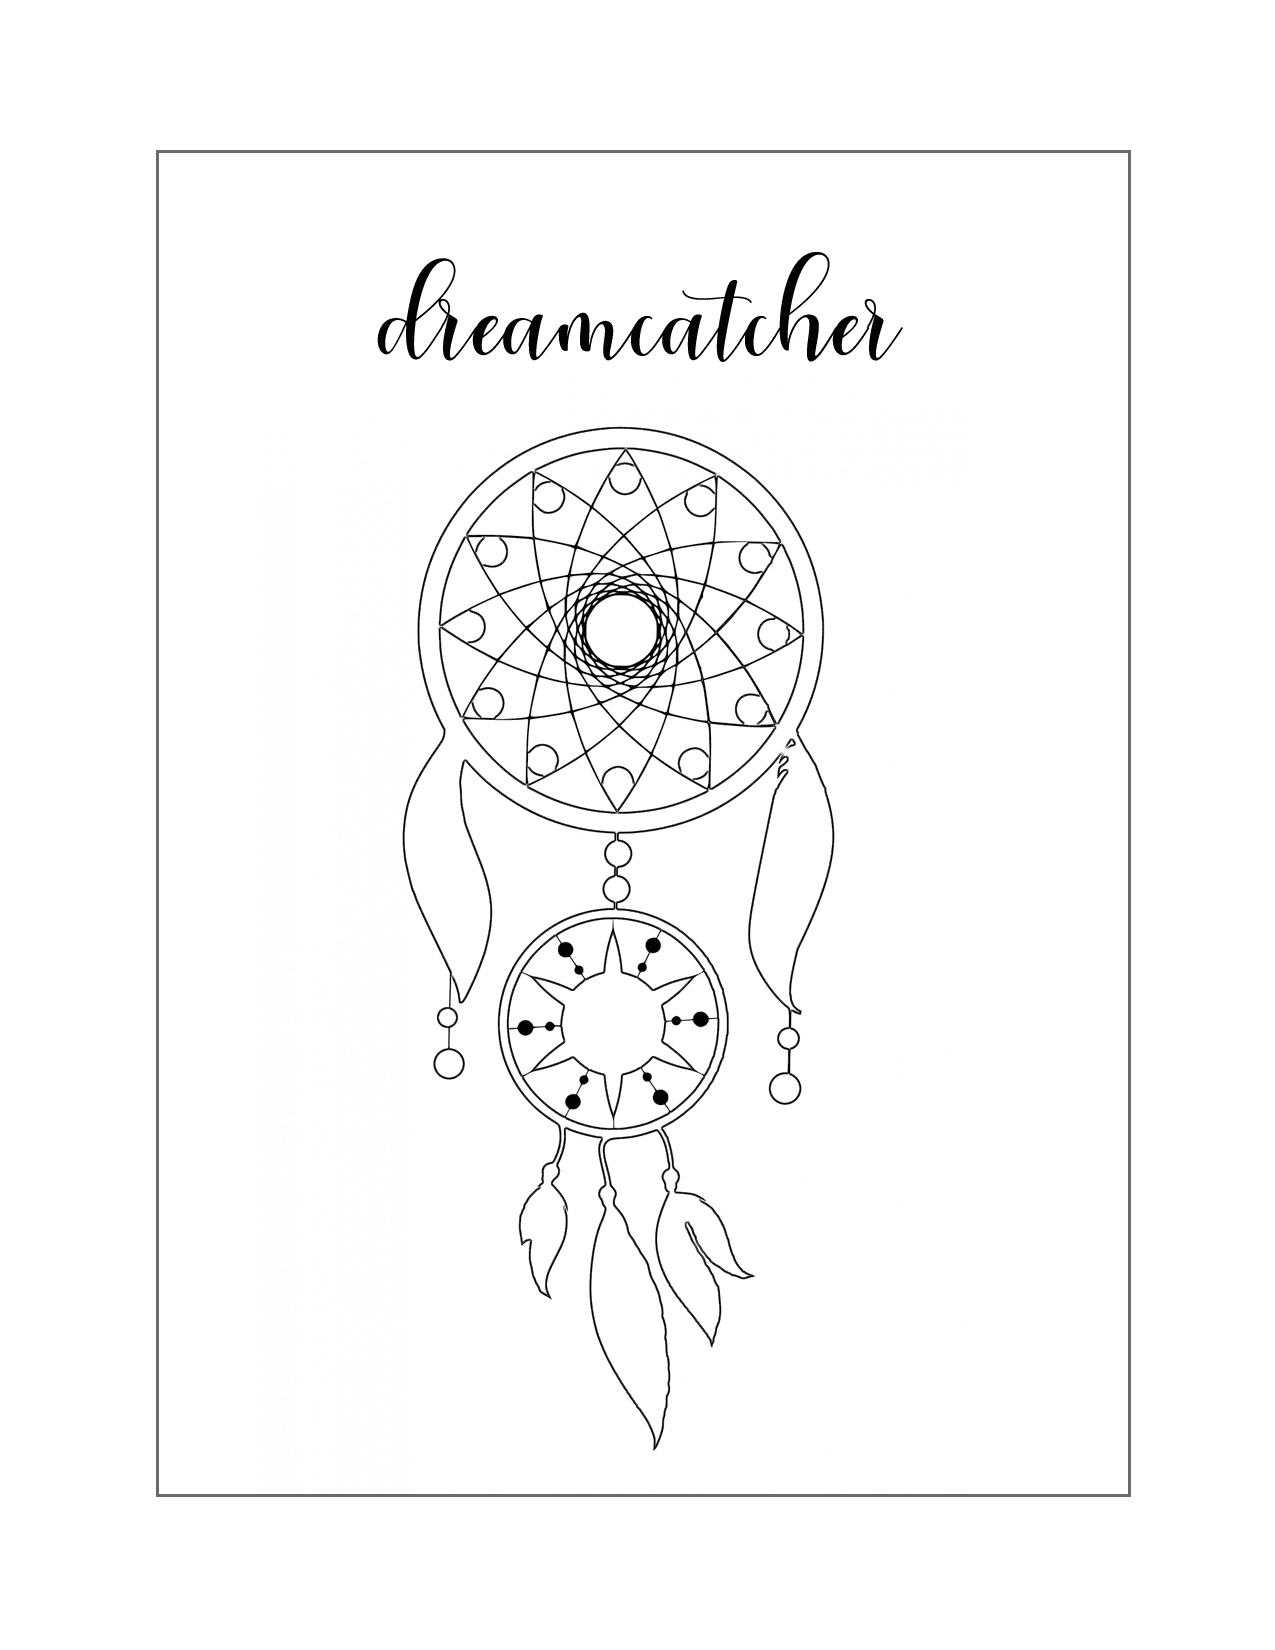 Dreamcatcher Outline Coloring Page